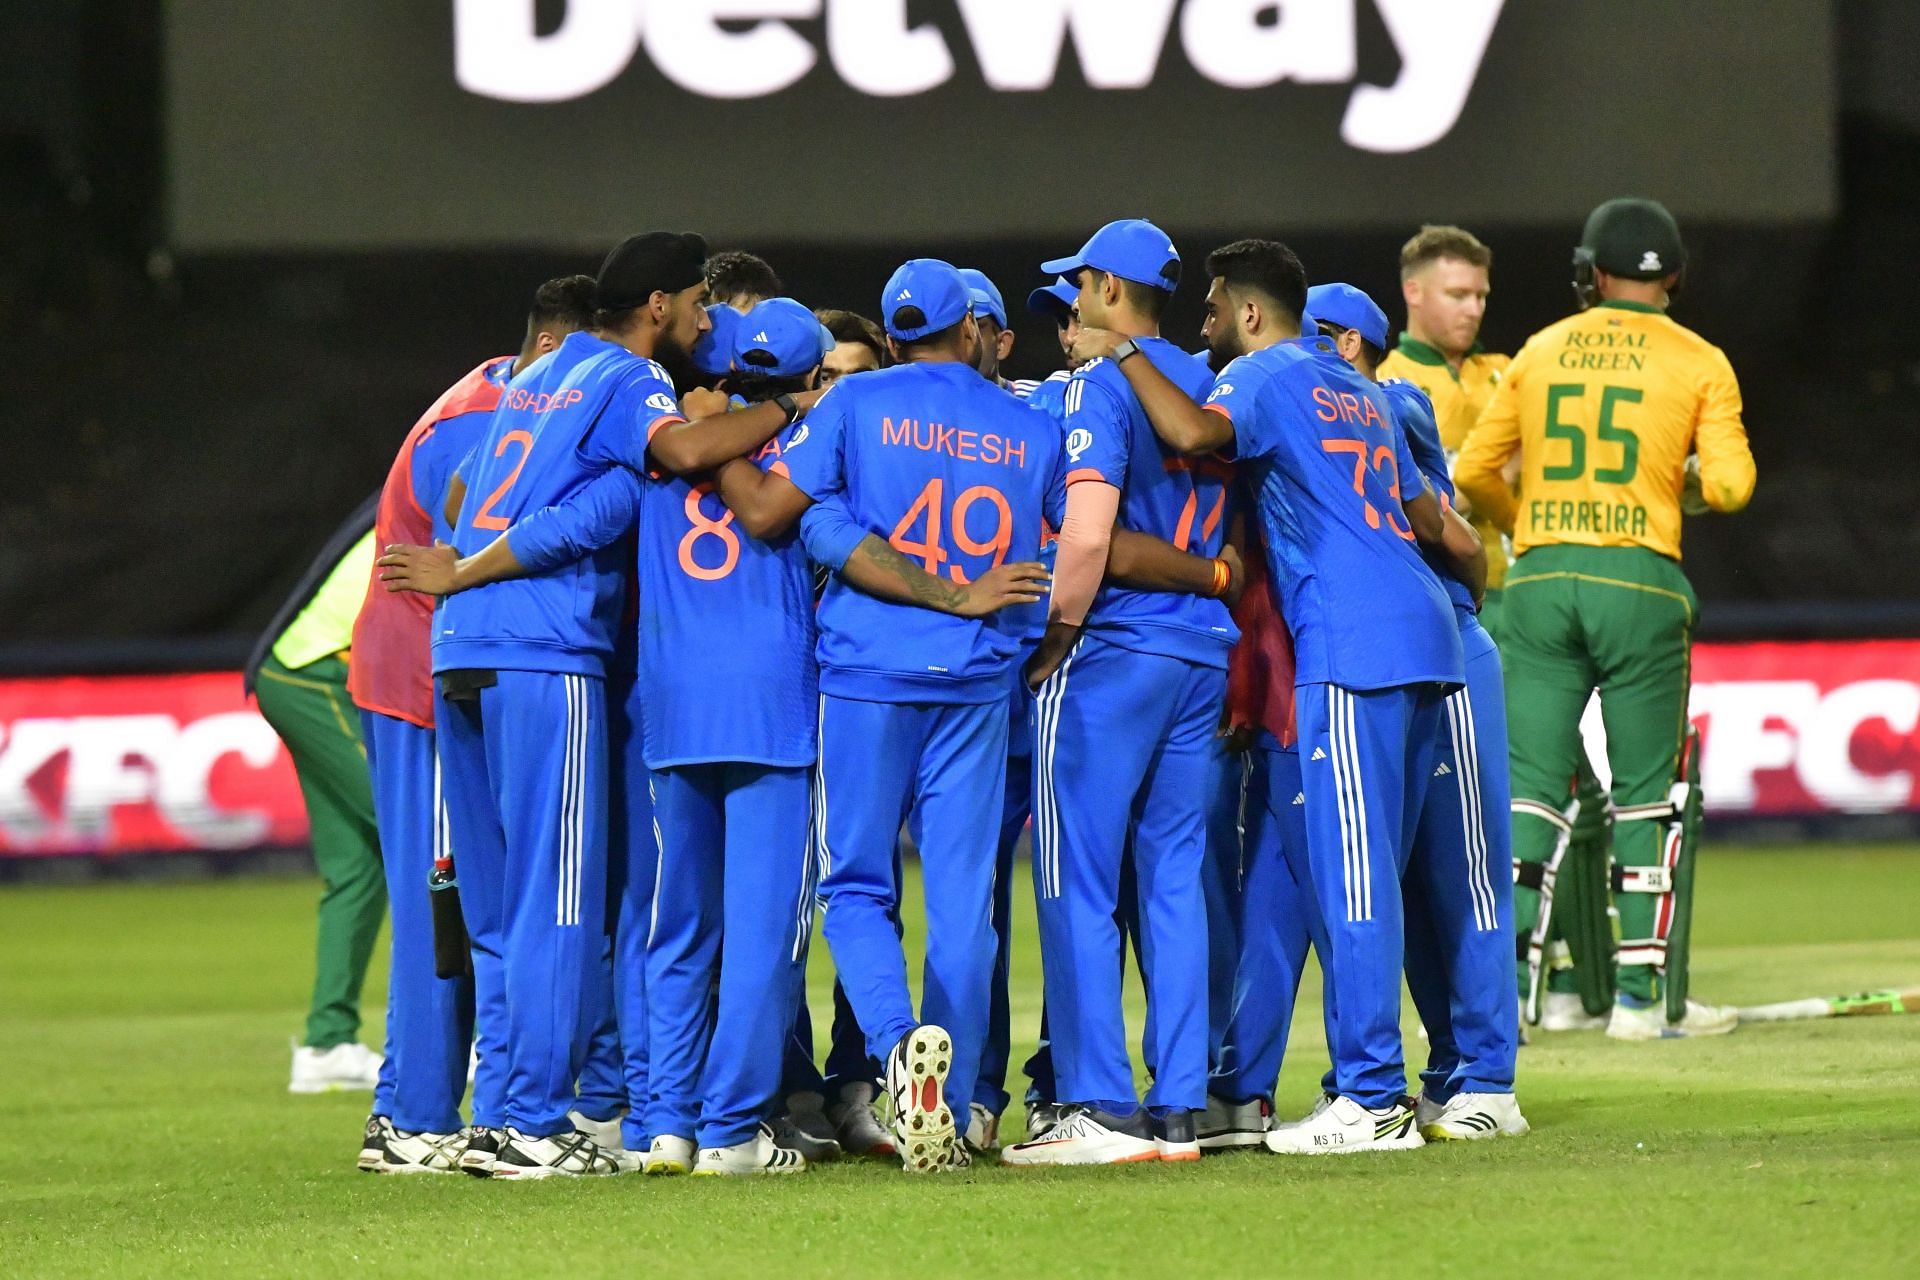 South Africa vs India, 1st ODI: Probable XIs, Match Prediction, Pitch Report, Weather Forecast, and Live Streaming Details